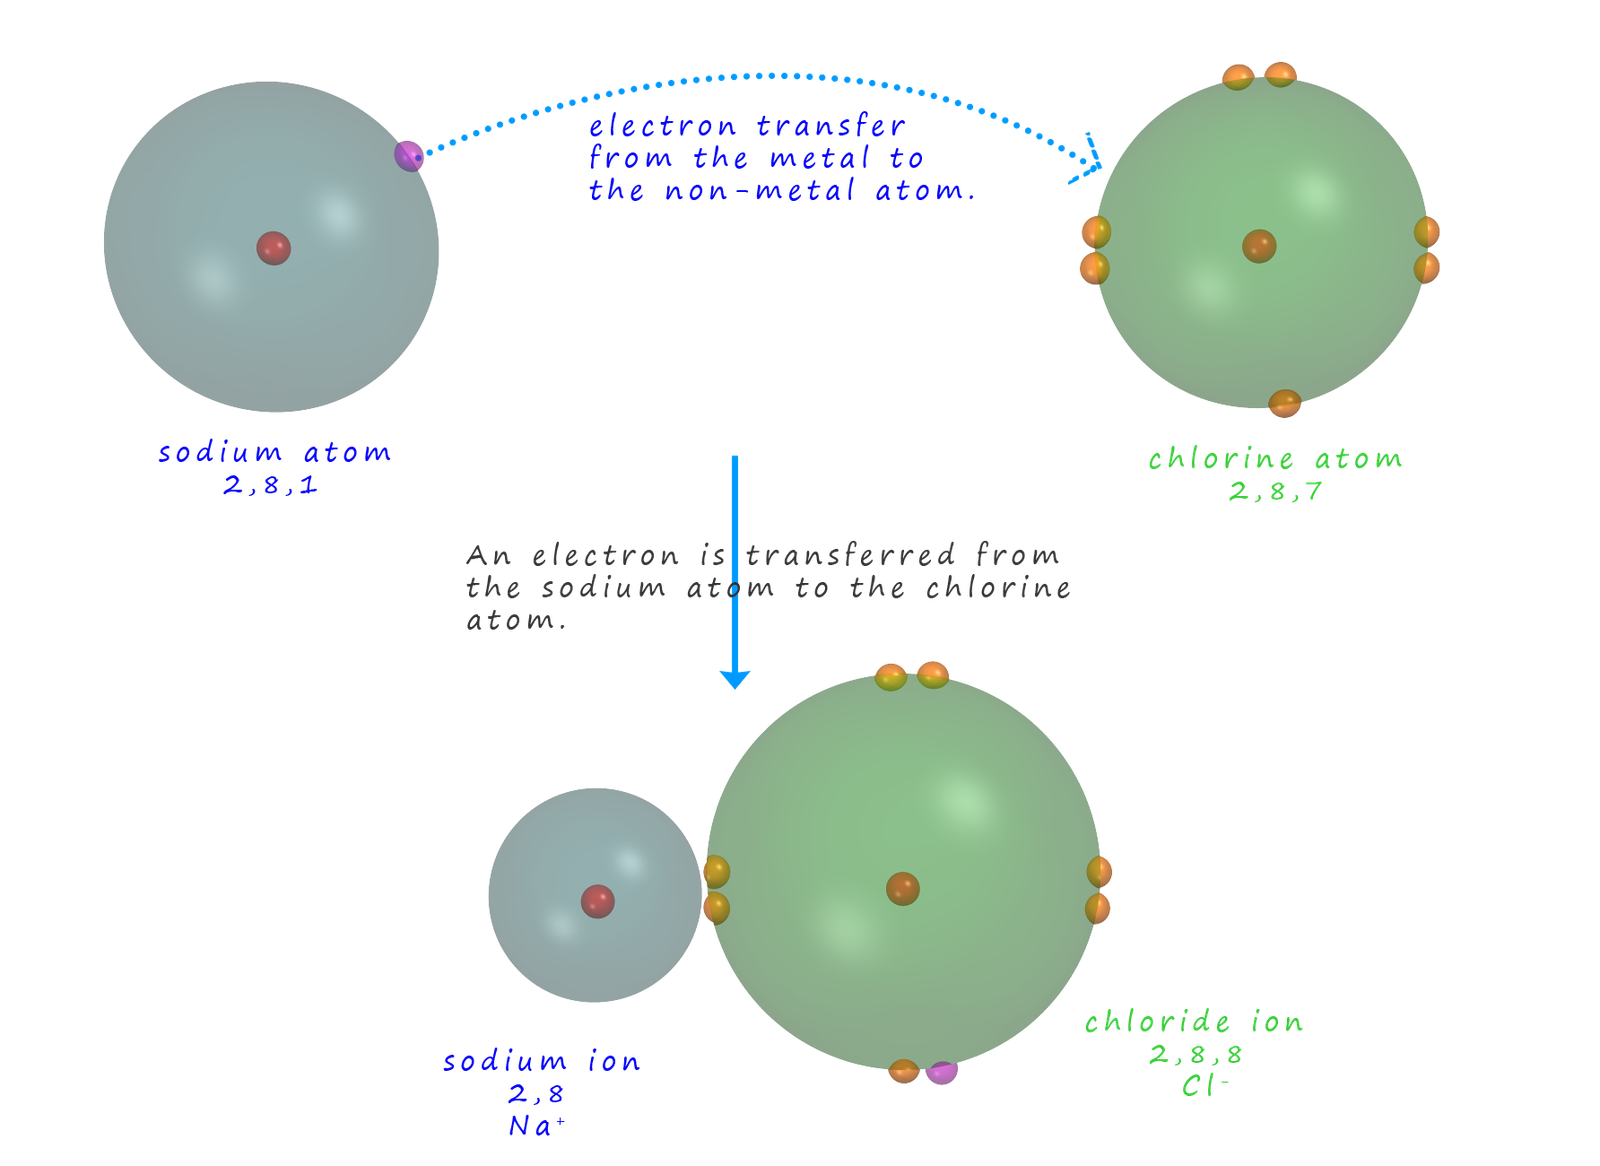 The formation of the ionic compound sodium chloride from sodium metal and chlorine by elecron transfer from the sodium atom to the chlorine atom.